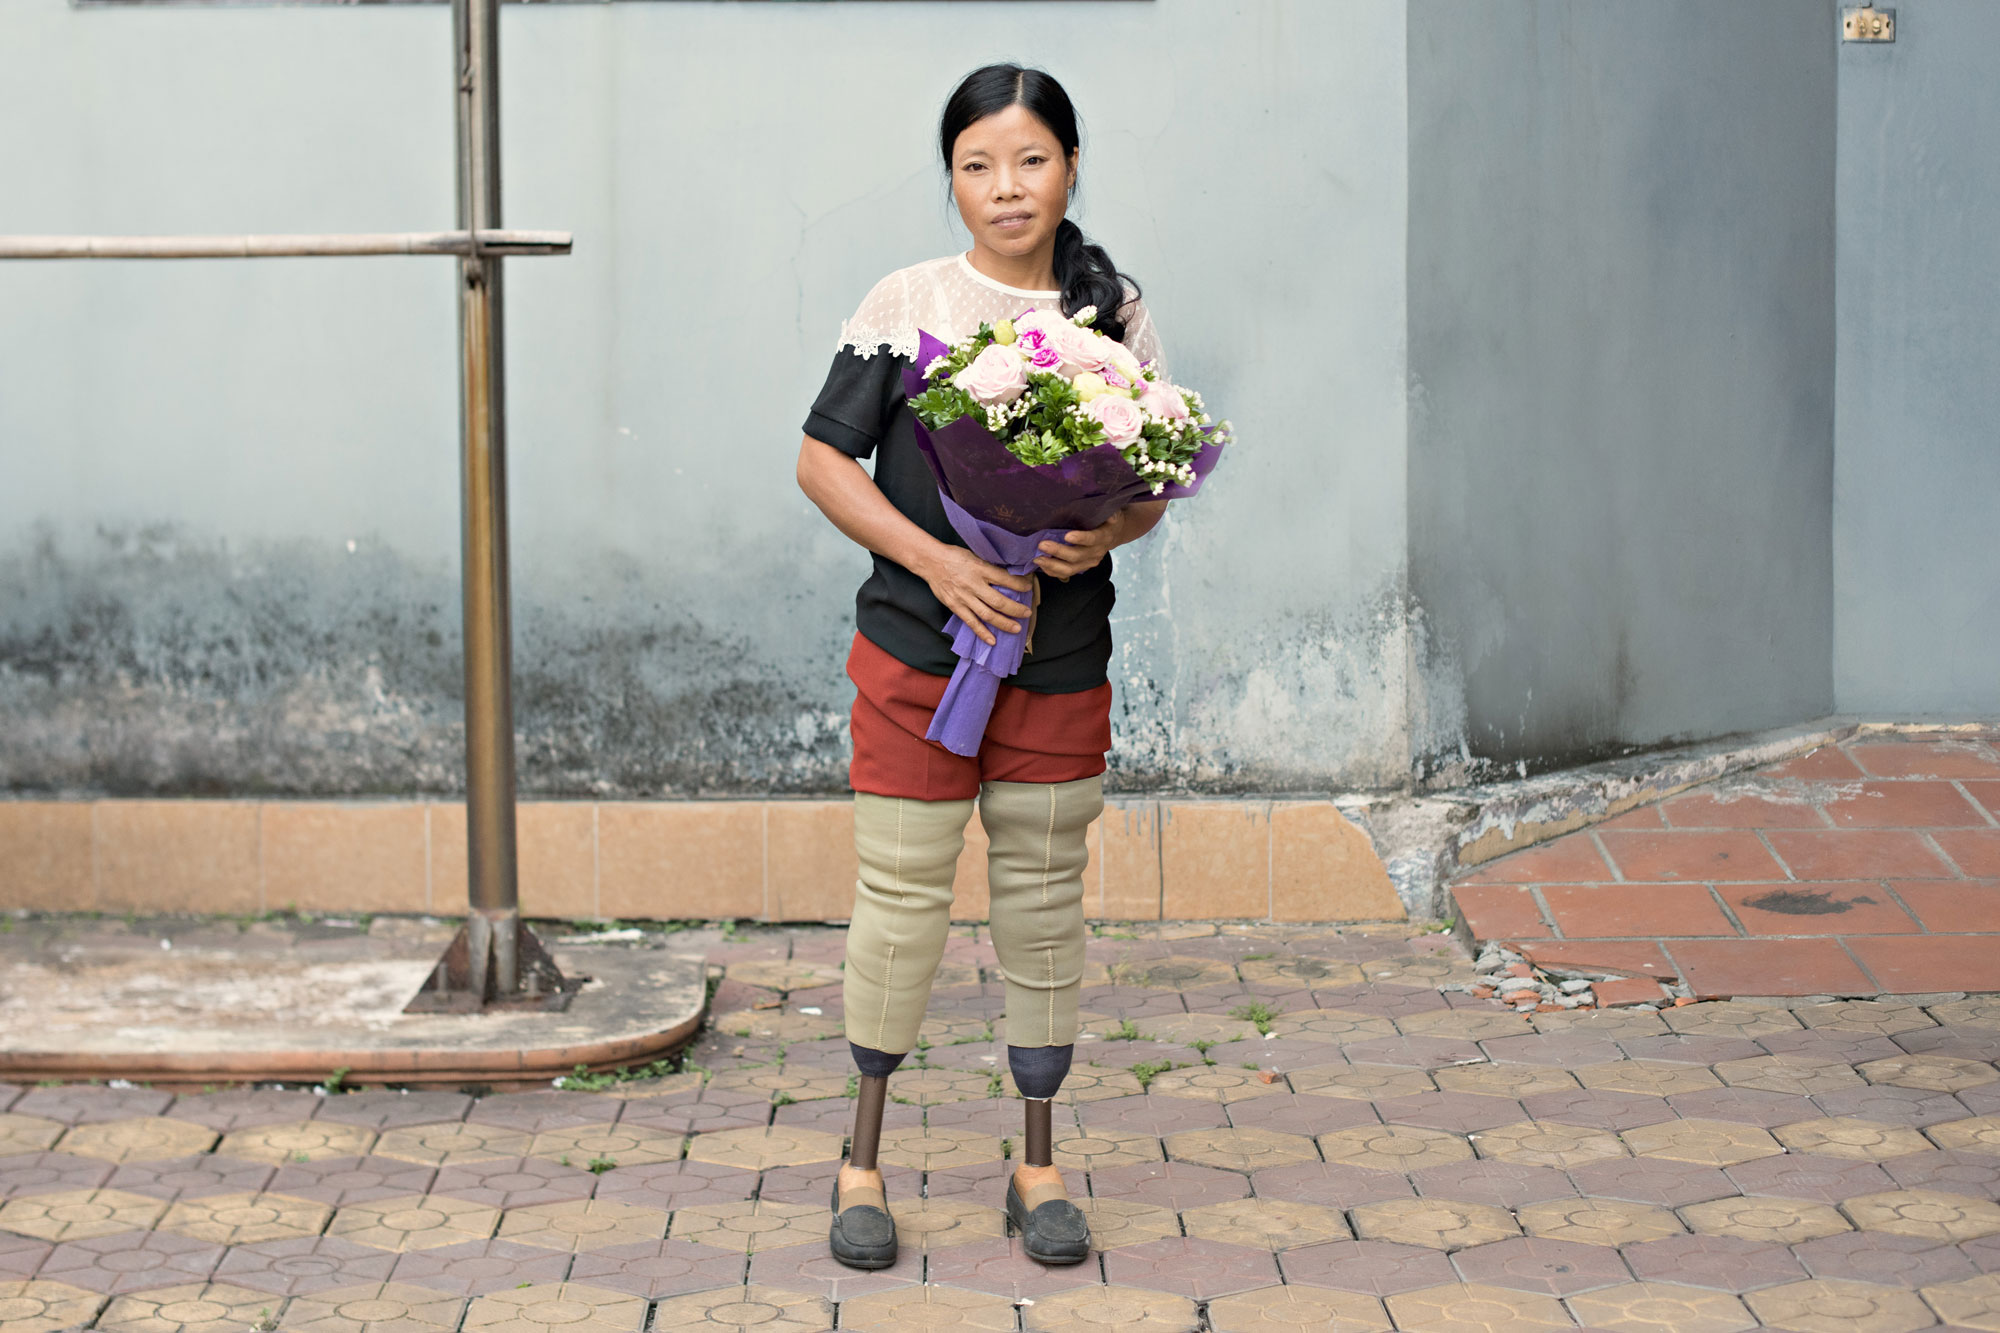 image of a woman holding flowers